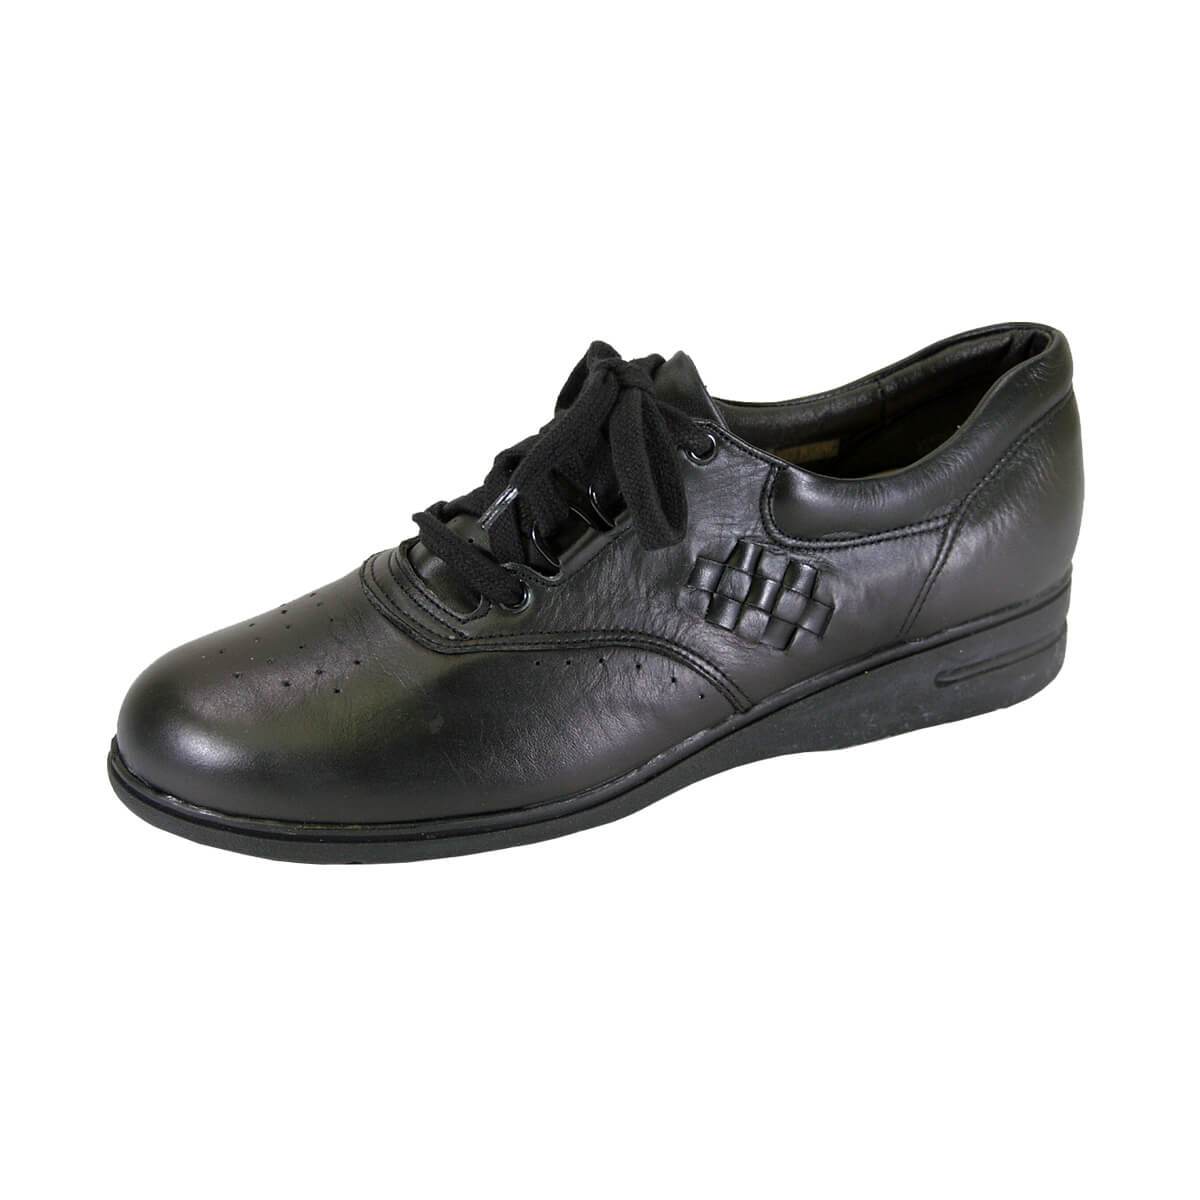 Fazpaz 24 Hour Comfort Dee Women's Wide Width Leather Lace Up Comfort Oxford Shoes